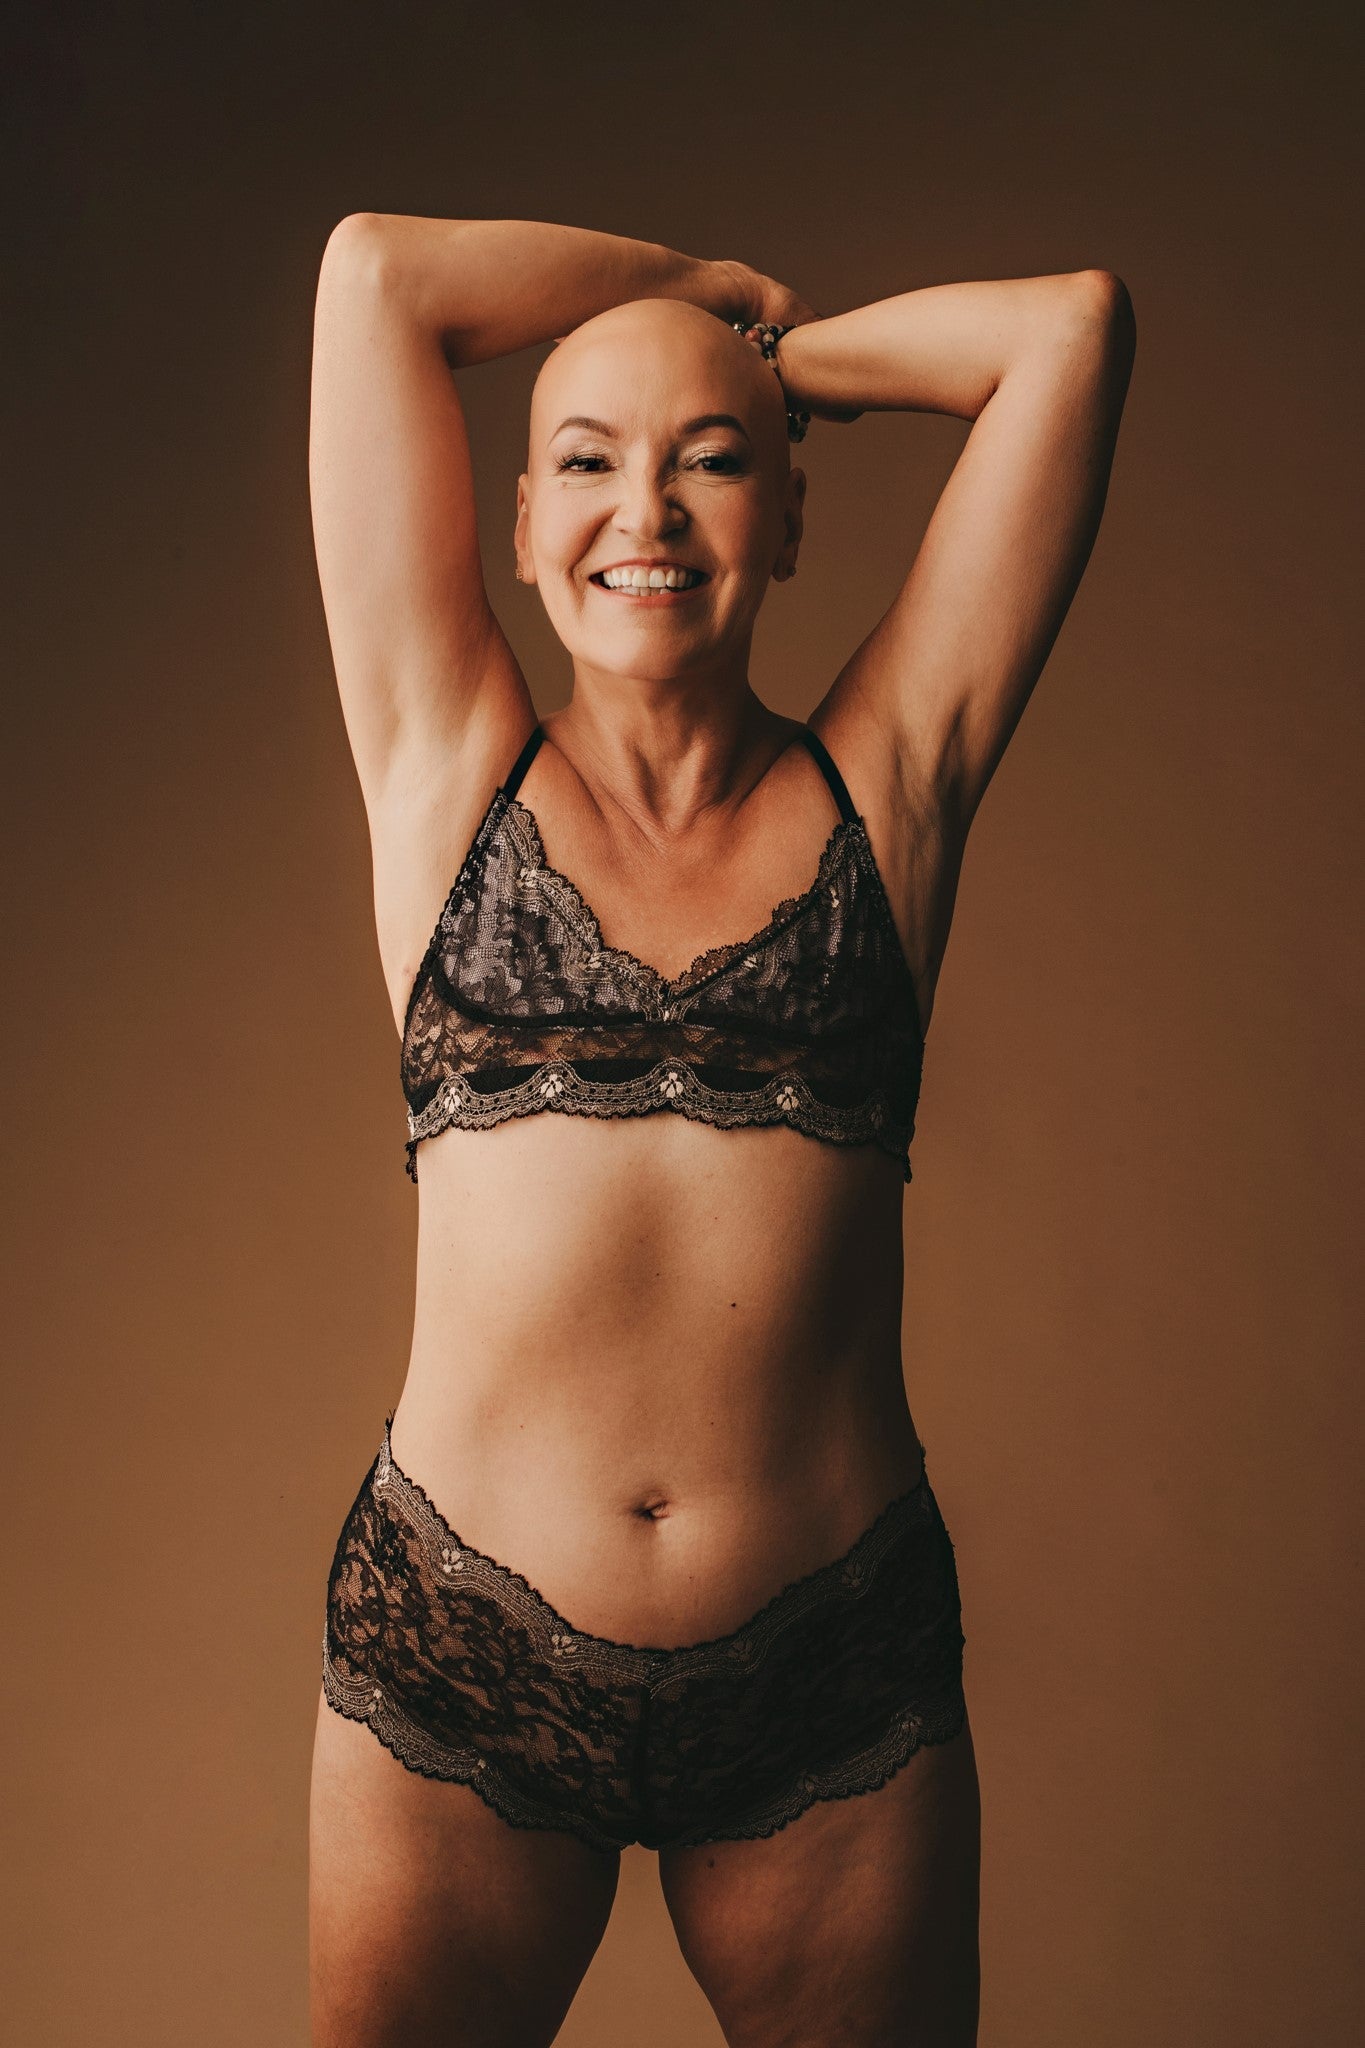 Flat & Fabulous: Lingerie for Women With Unreconstructed Breasts